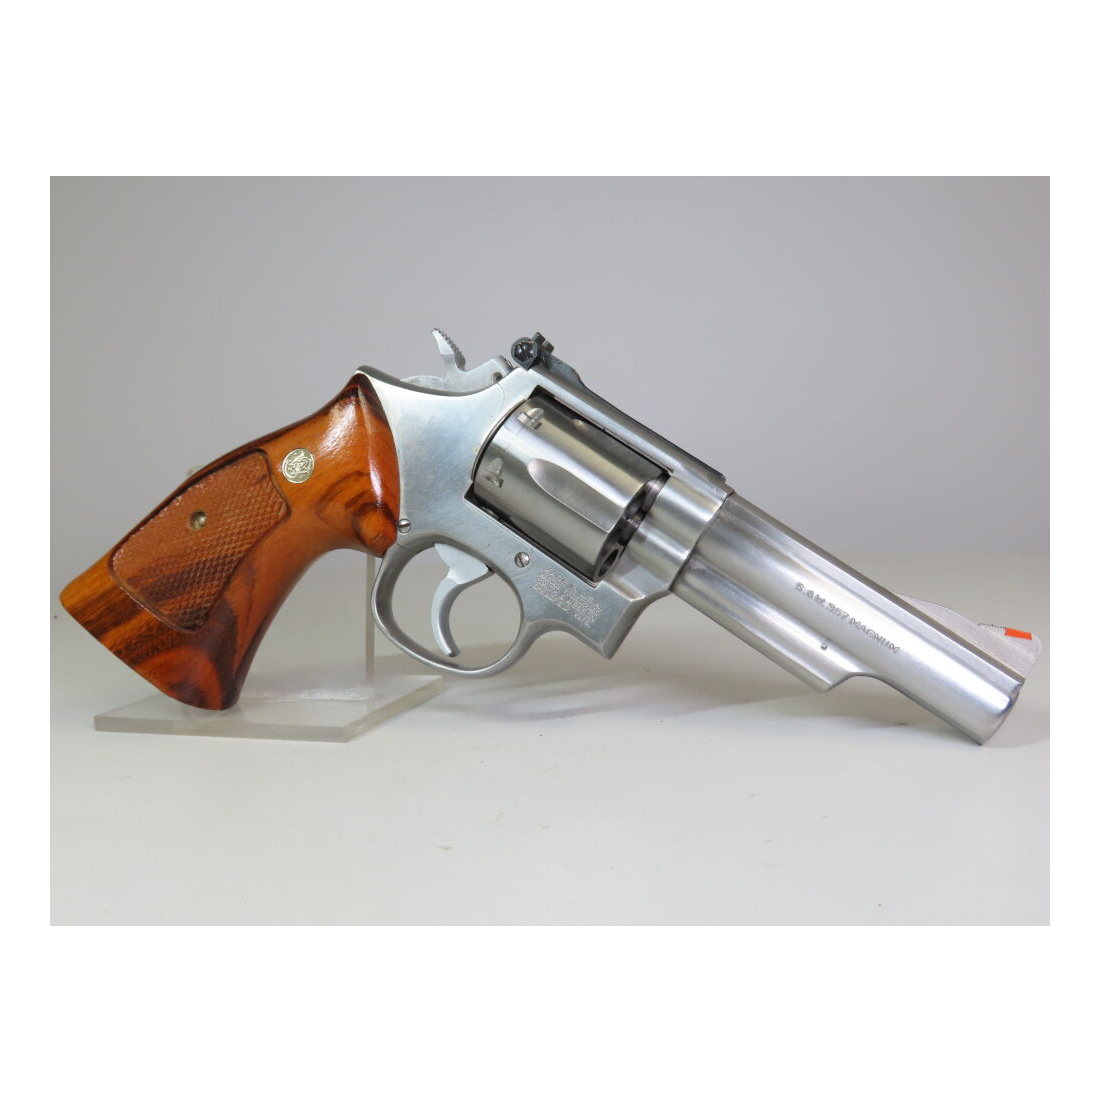 Smith & Wesson 66 in 4 Zoll.